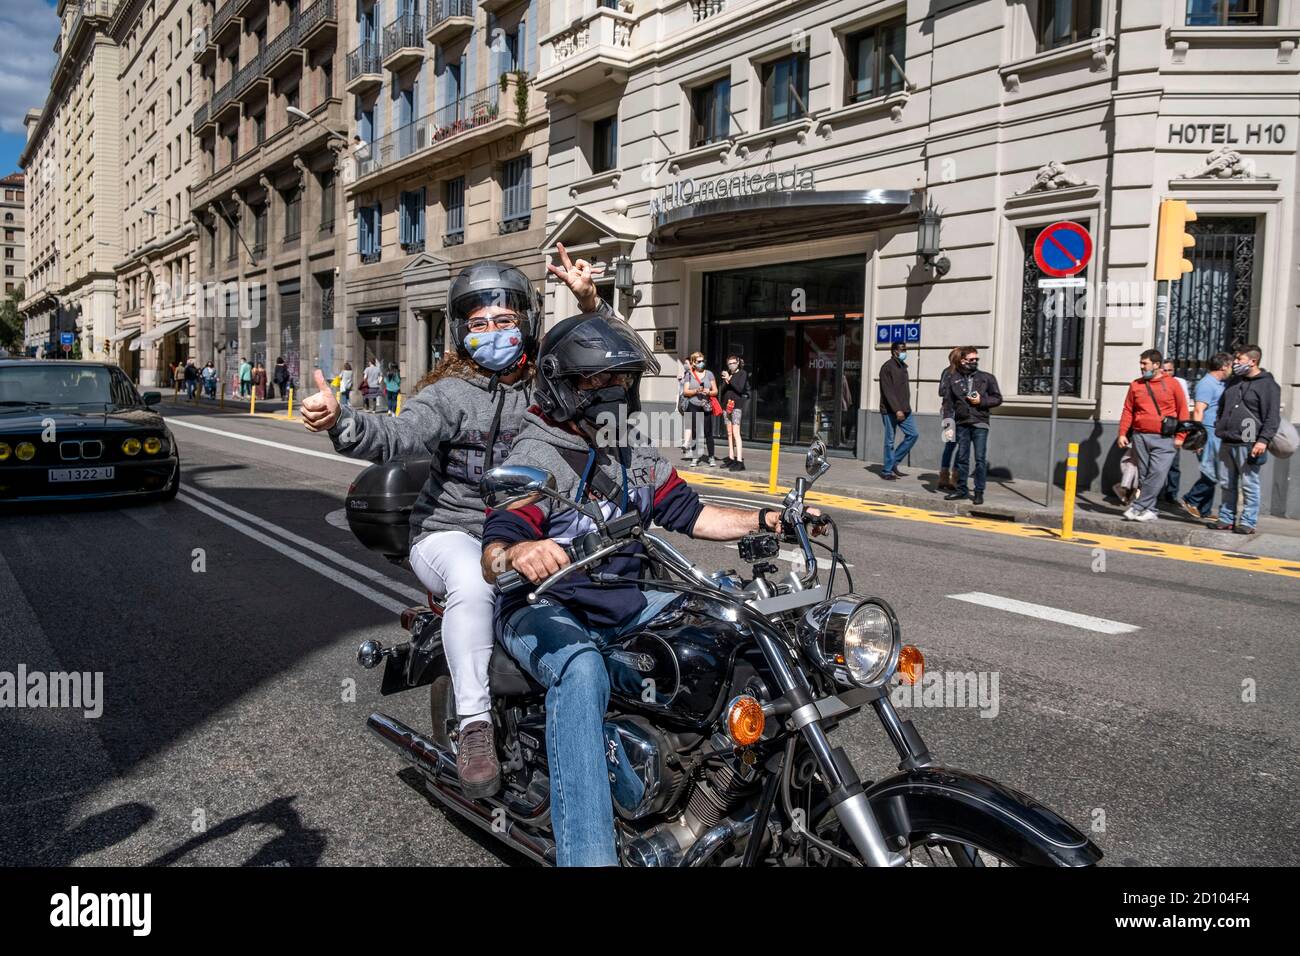 Barcelona, Spain. 04th Oct, 2020. A motorcyclist wearing a mask is seen  raising his hand in victory while riding his motorcycle without an  eco-label during the demonstration.Demonstration of drivers and vehicles  affected